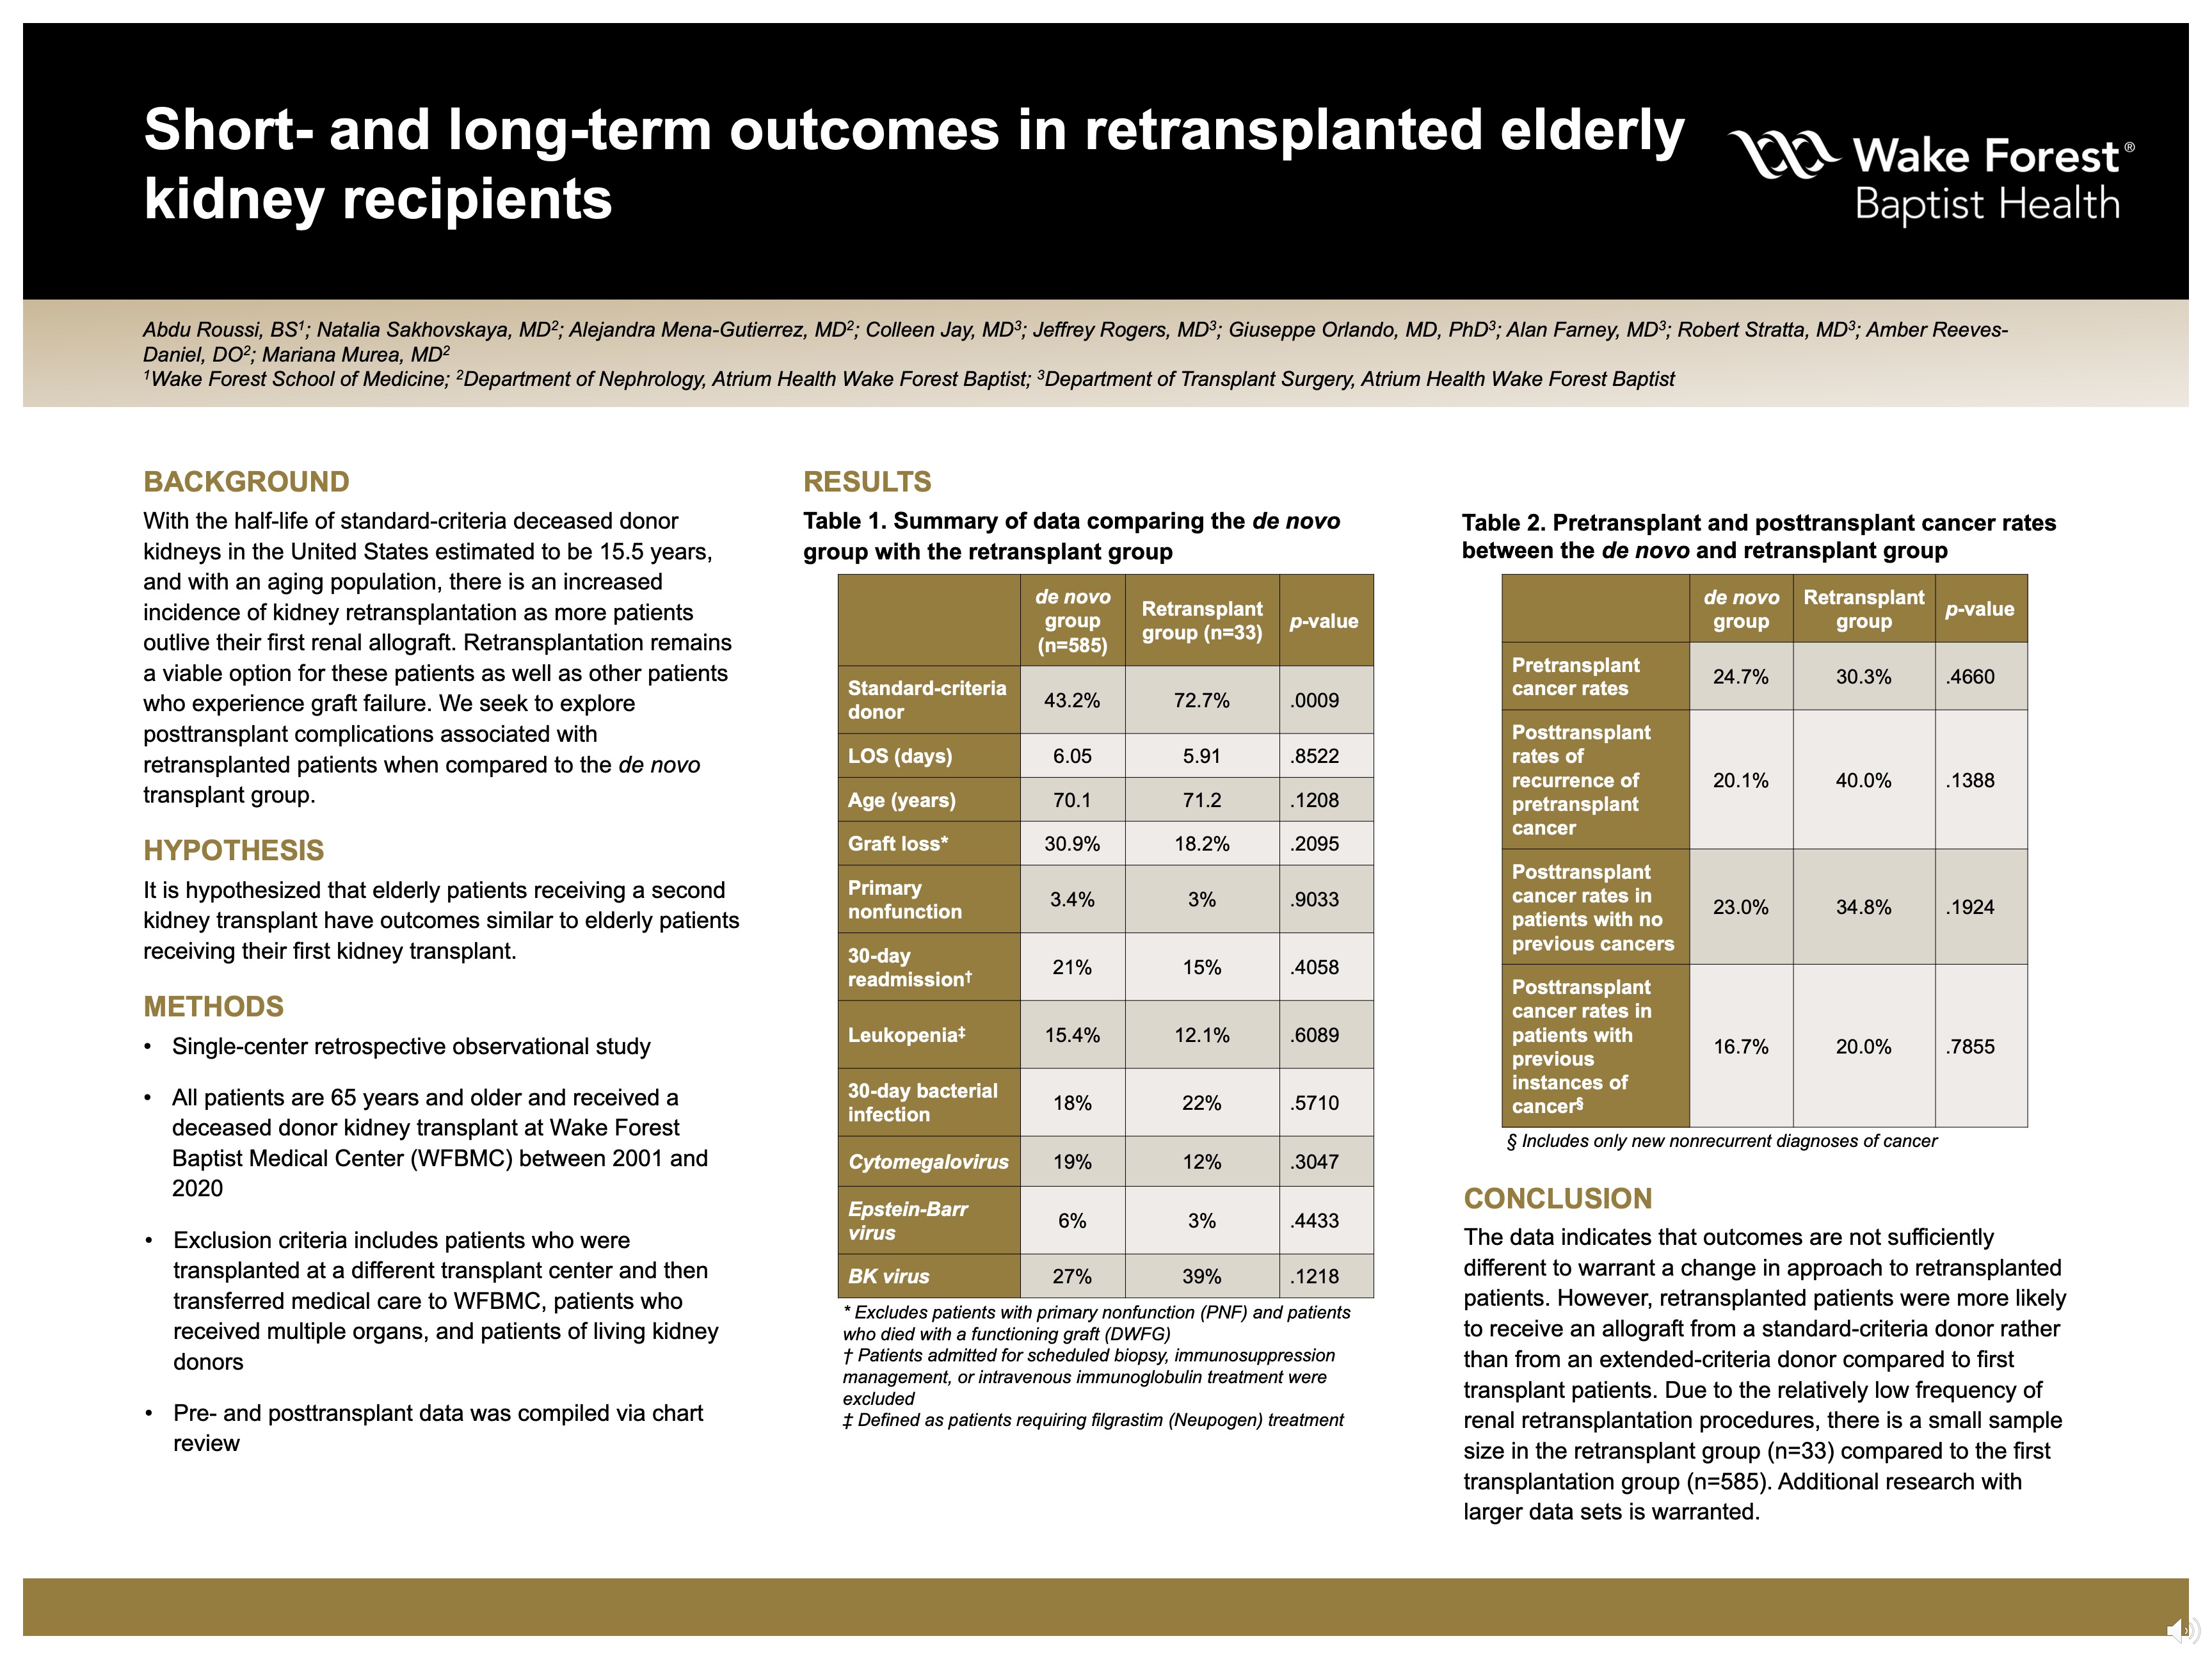 Showcase Image for Short- and long-term outcomes in retransplanted elderly kidney recipients